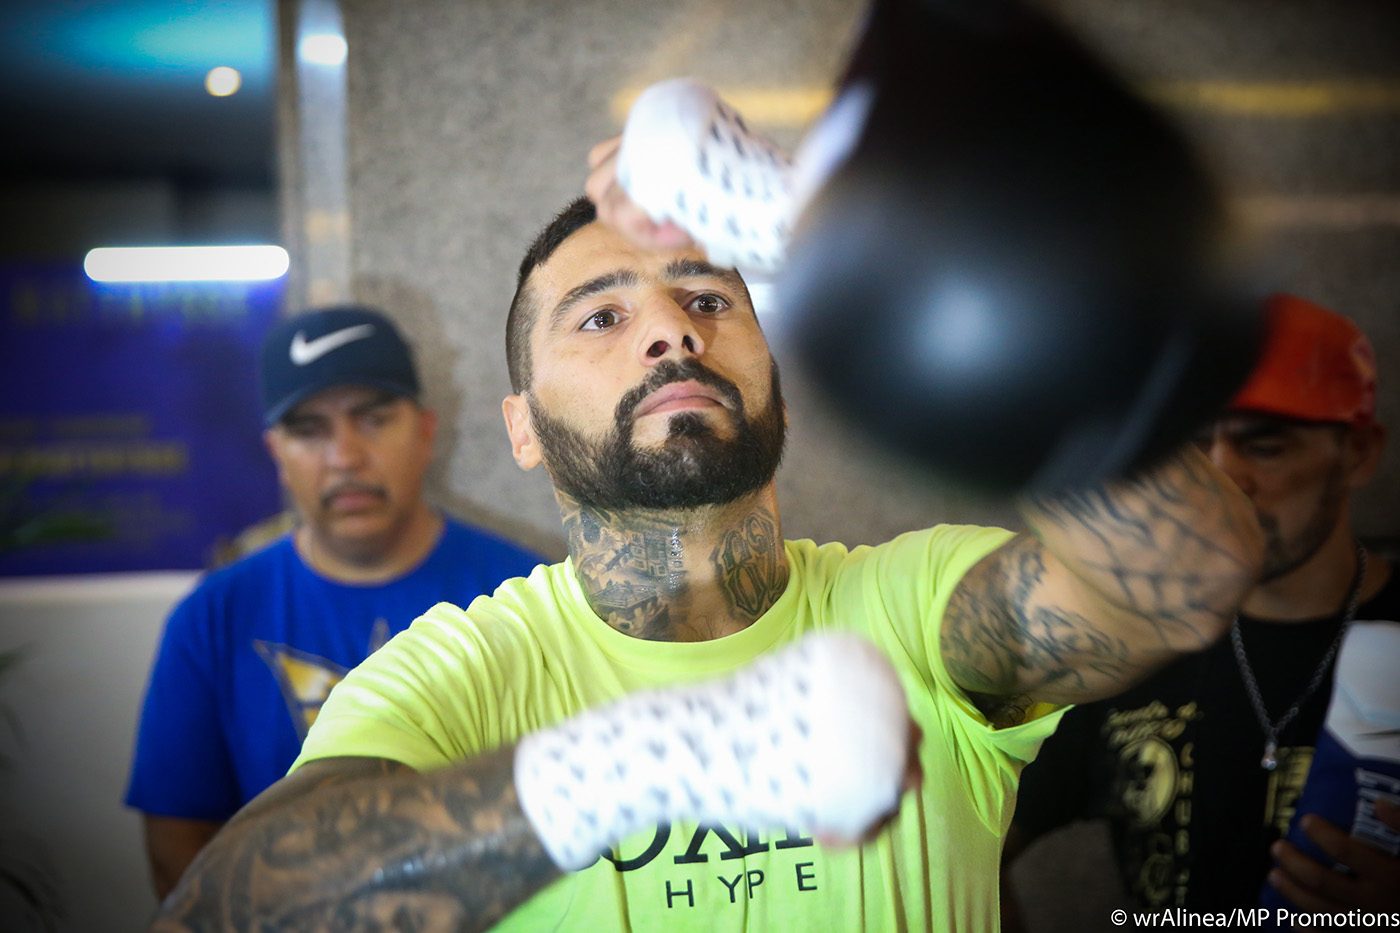 Matthysse out to cement ring legacy vs Pacquiao